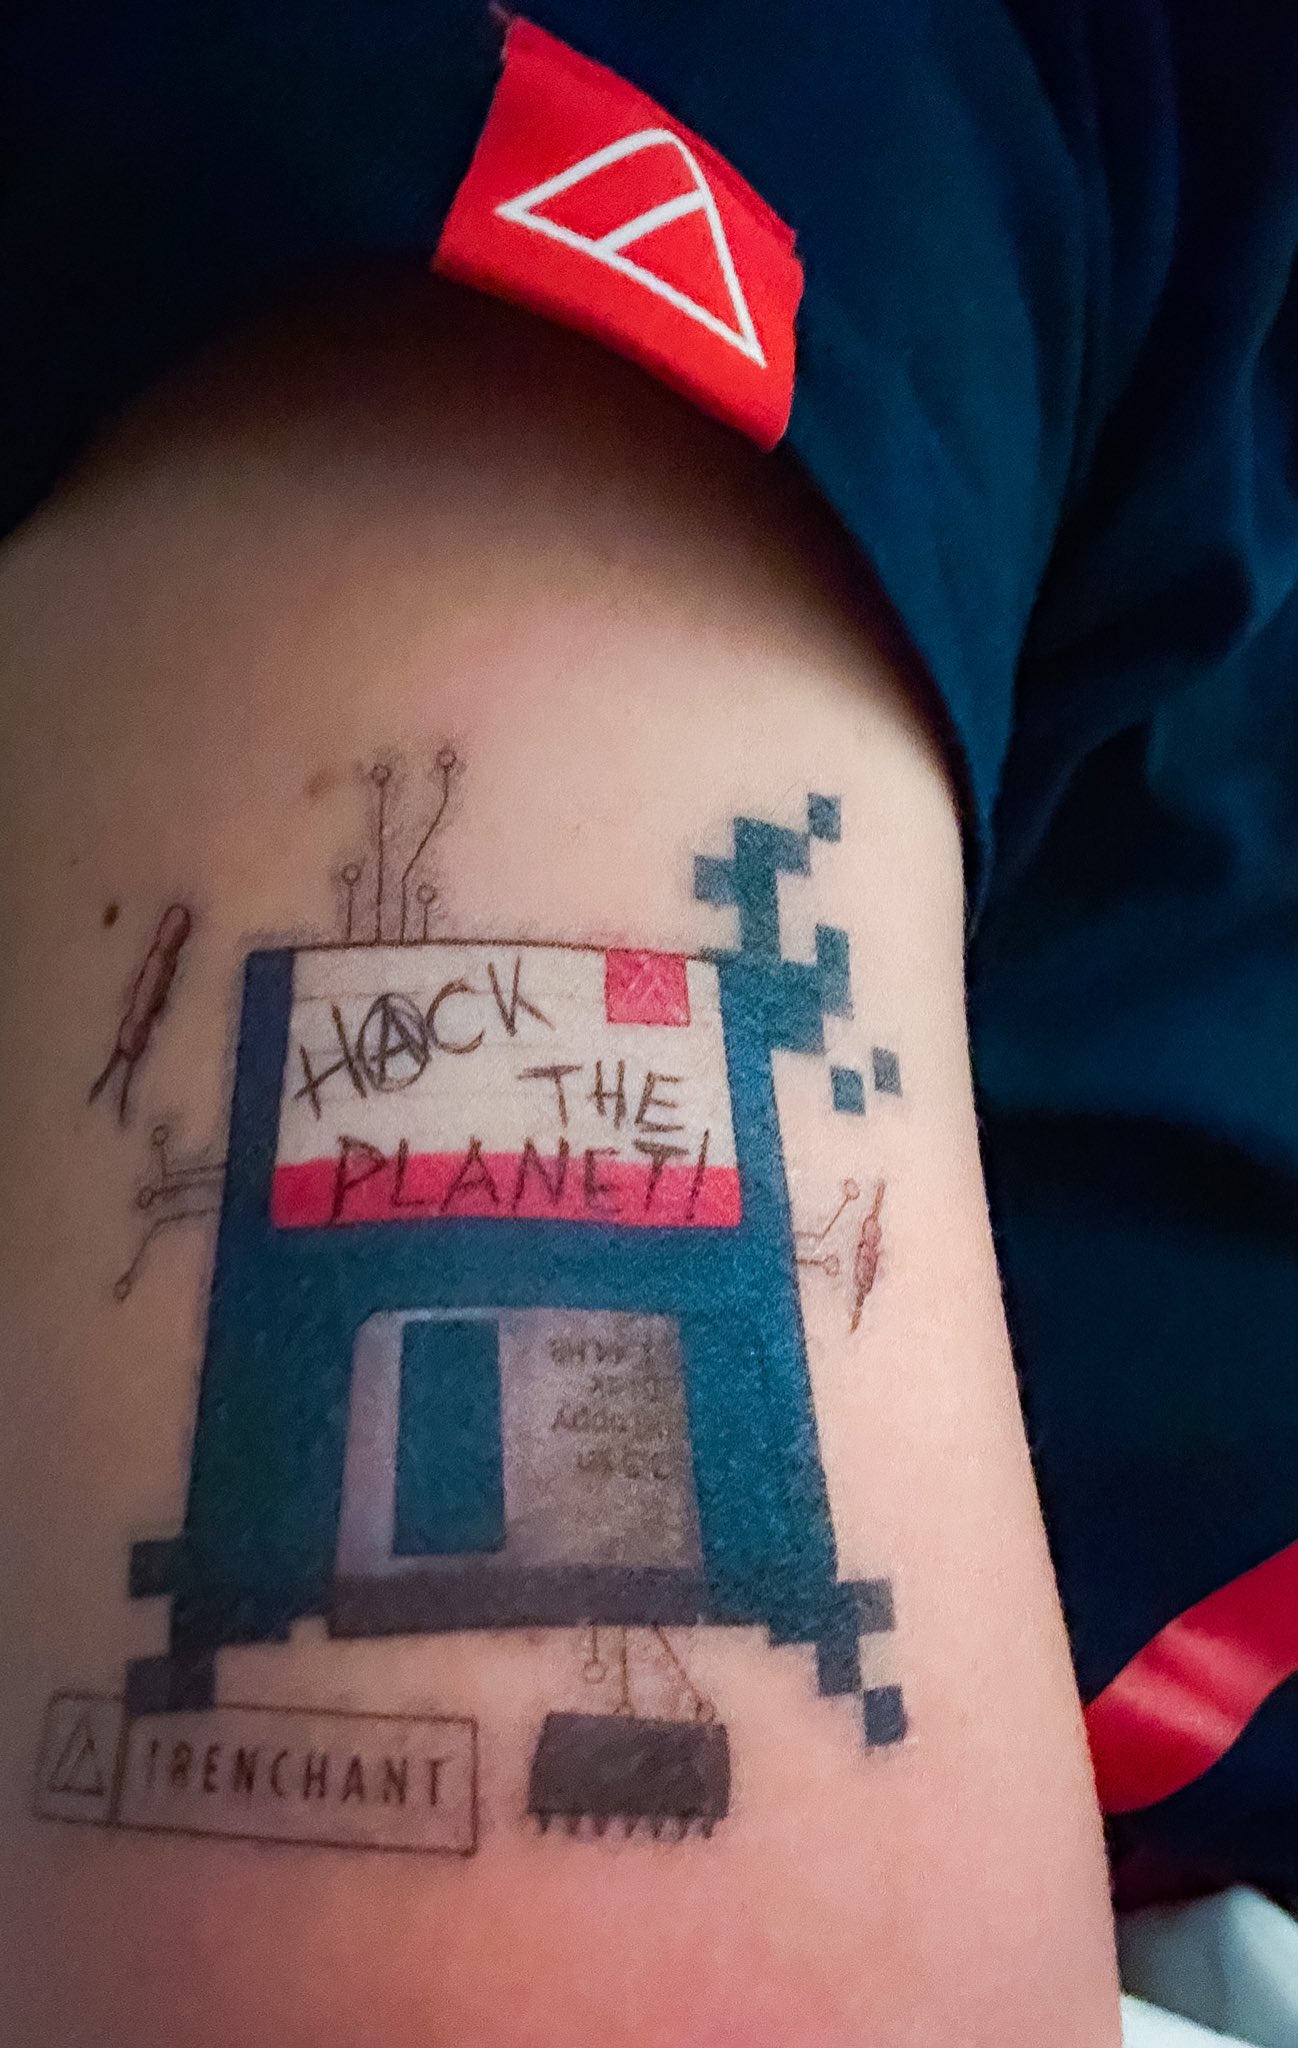 Since we're showing off our nerd tattoos (please ignore the giant blemish)  8-) : r/ProgrammerHumor